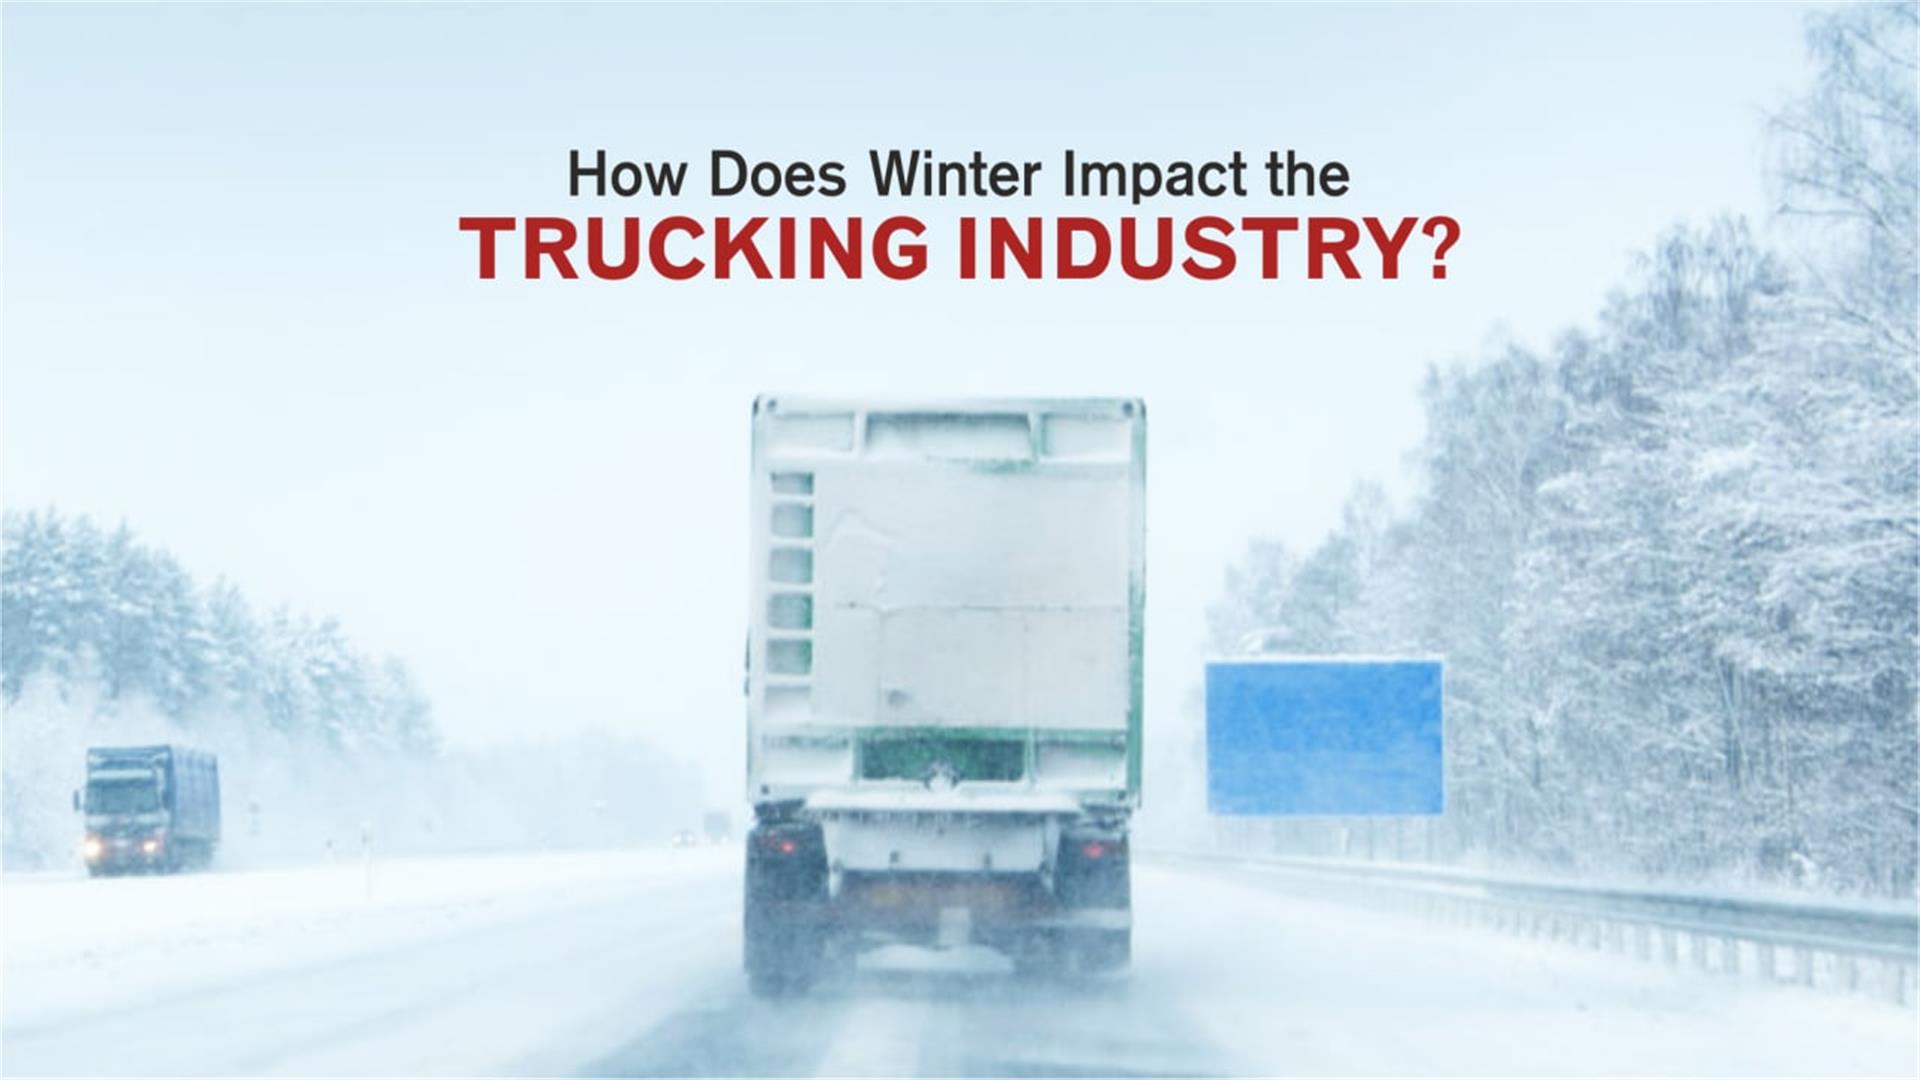 How Does Winter Impact the Trucking Industry?